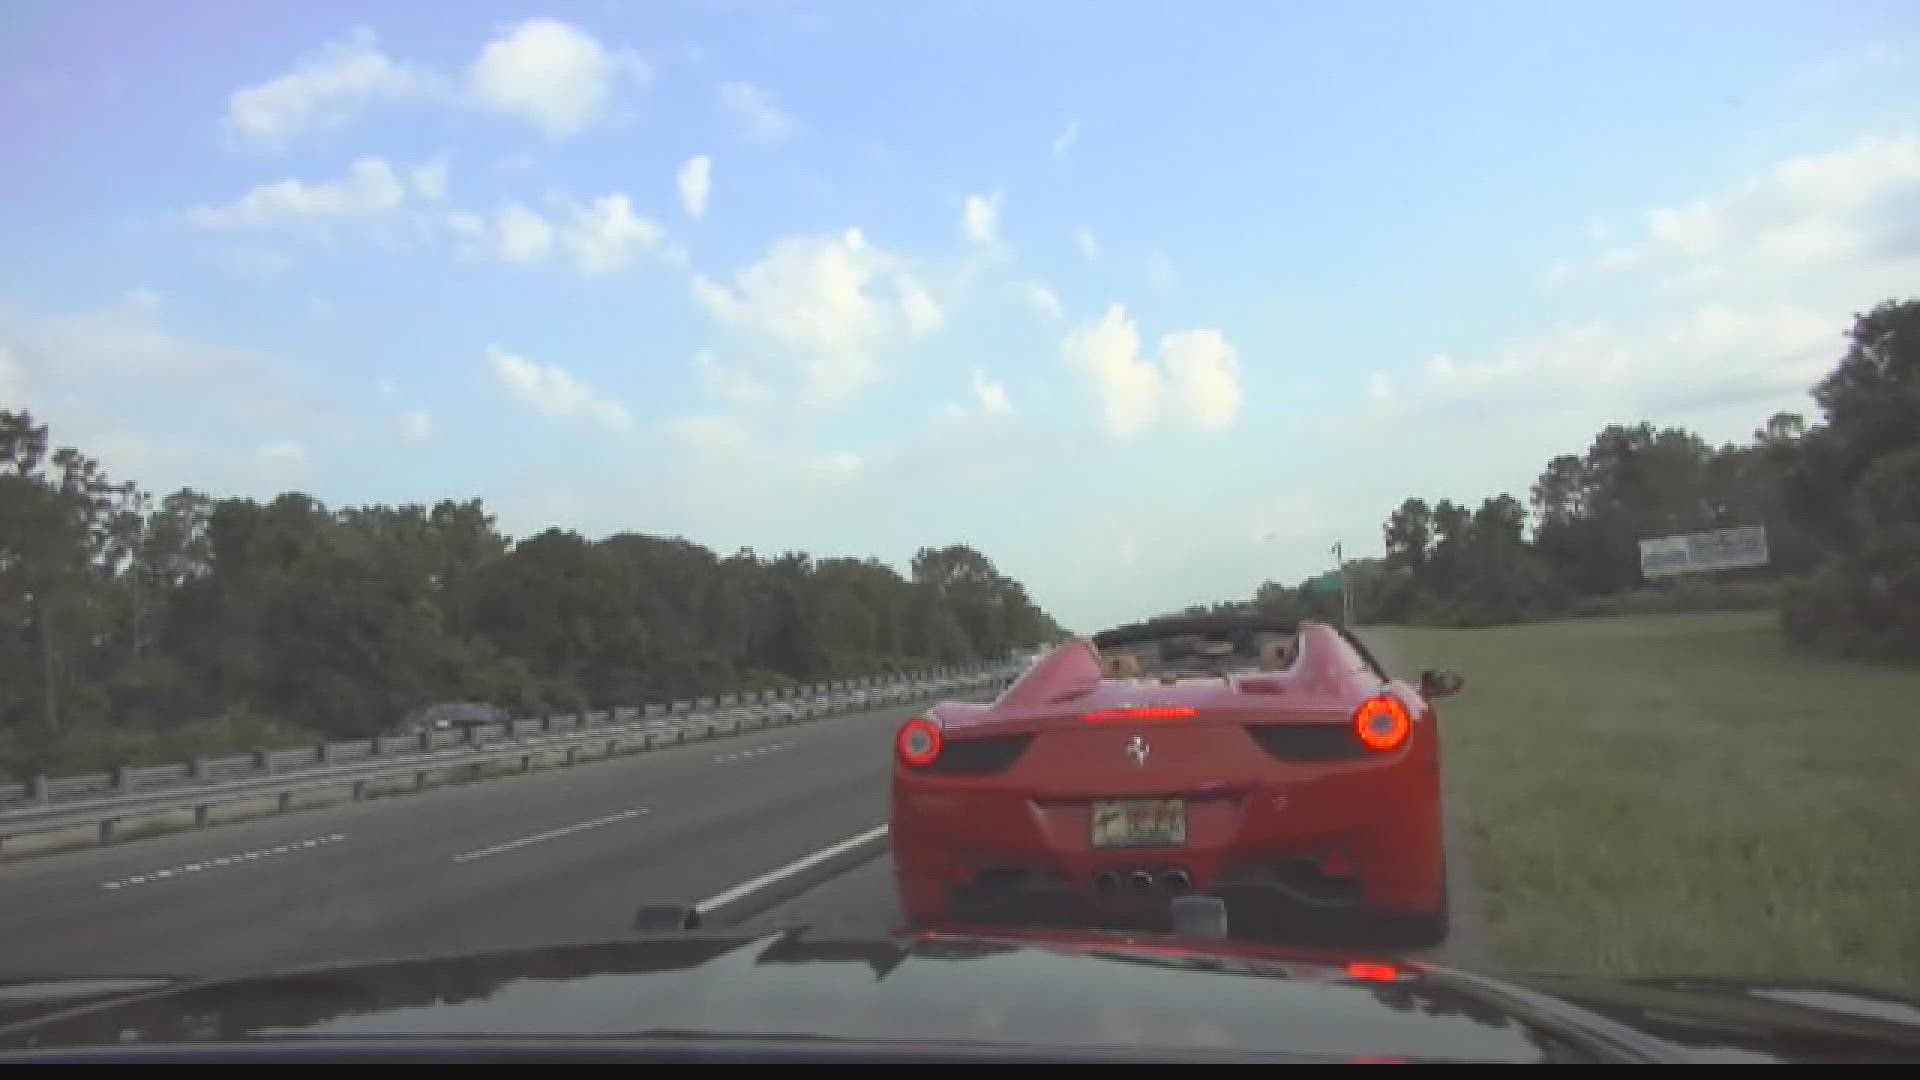 Joseph Mullins was pulled over for driving his Ferrari 22 mph over the speed limit, a report shows. Highway Patrol said he had already been given a warning.